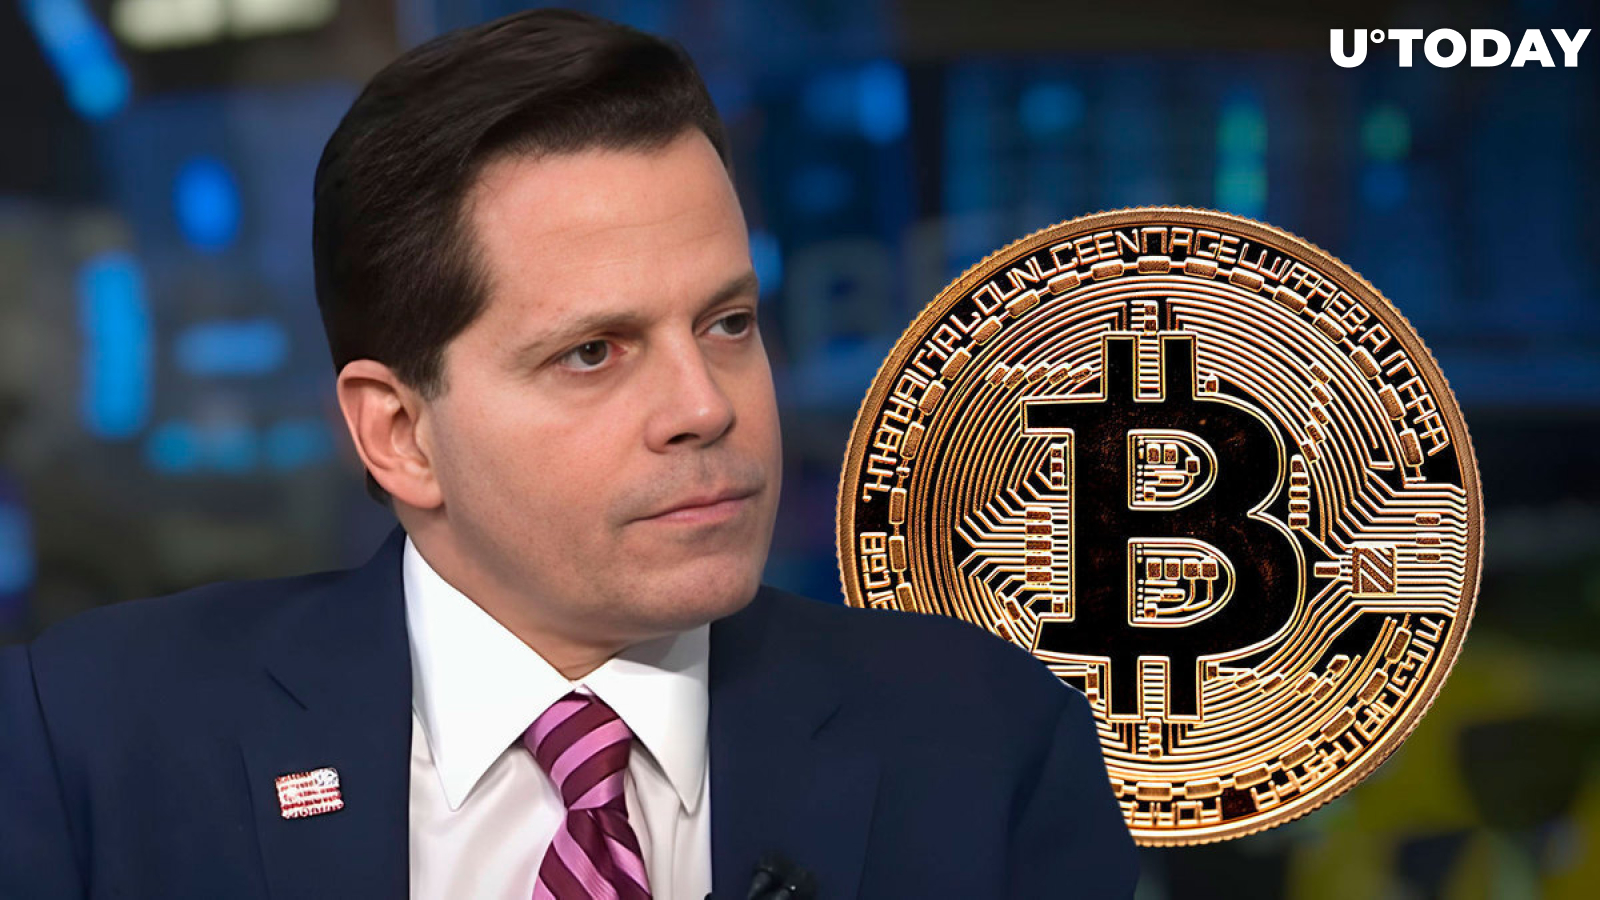 Bitcoin to Become Store of Value by 2026, Says Anthony Scaramucci